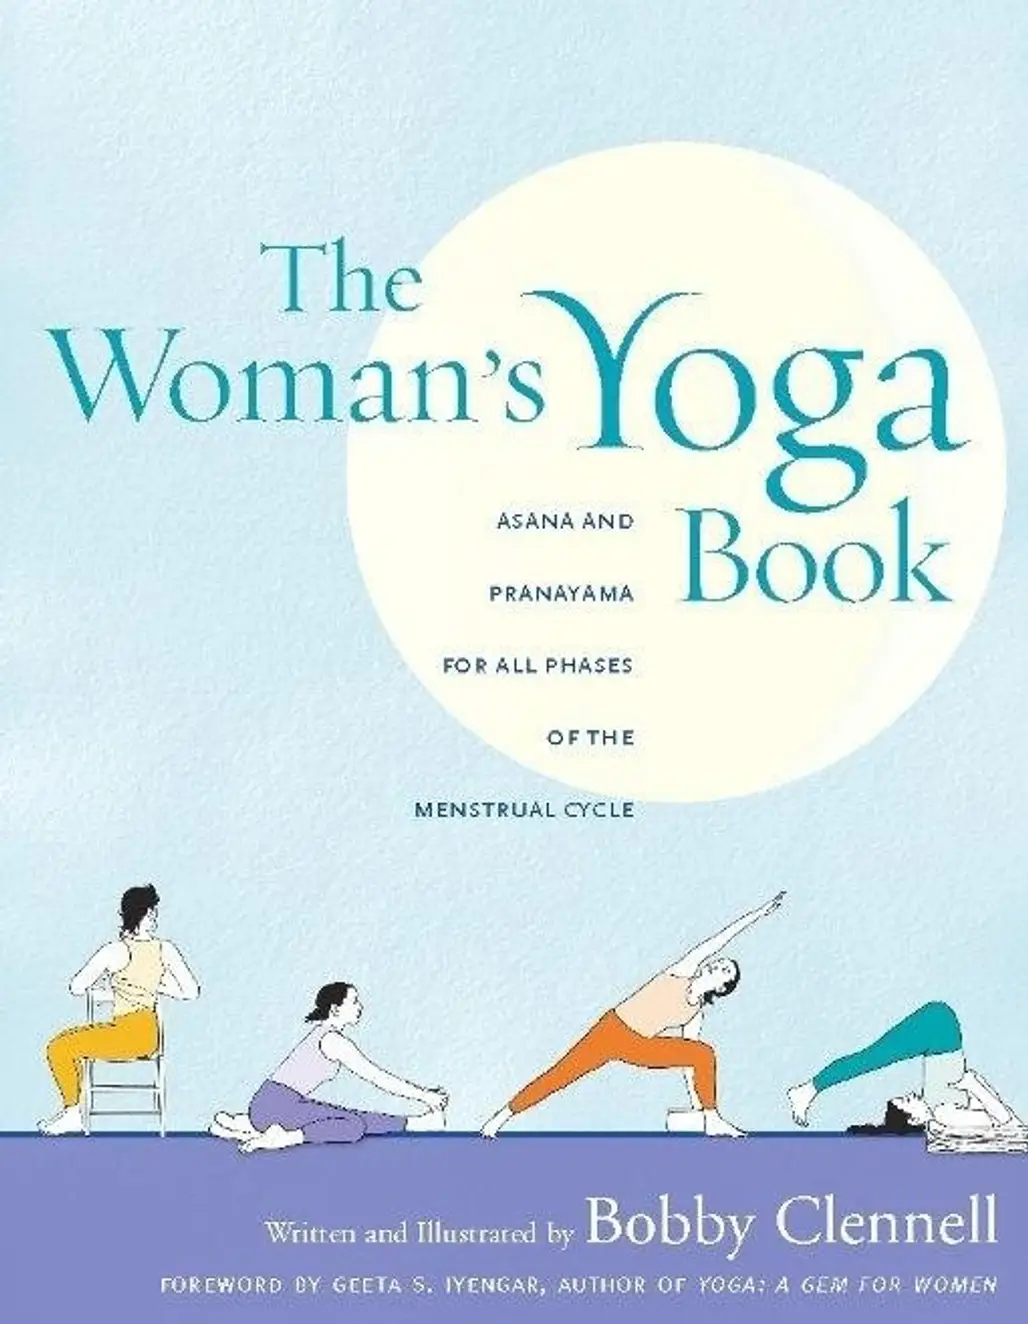 The Woman’s Yoga Book – by Bobby Clennell